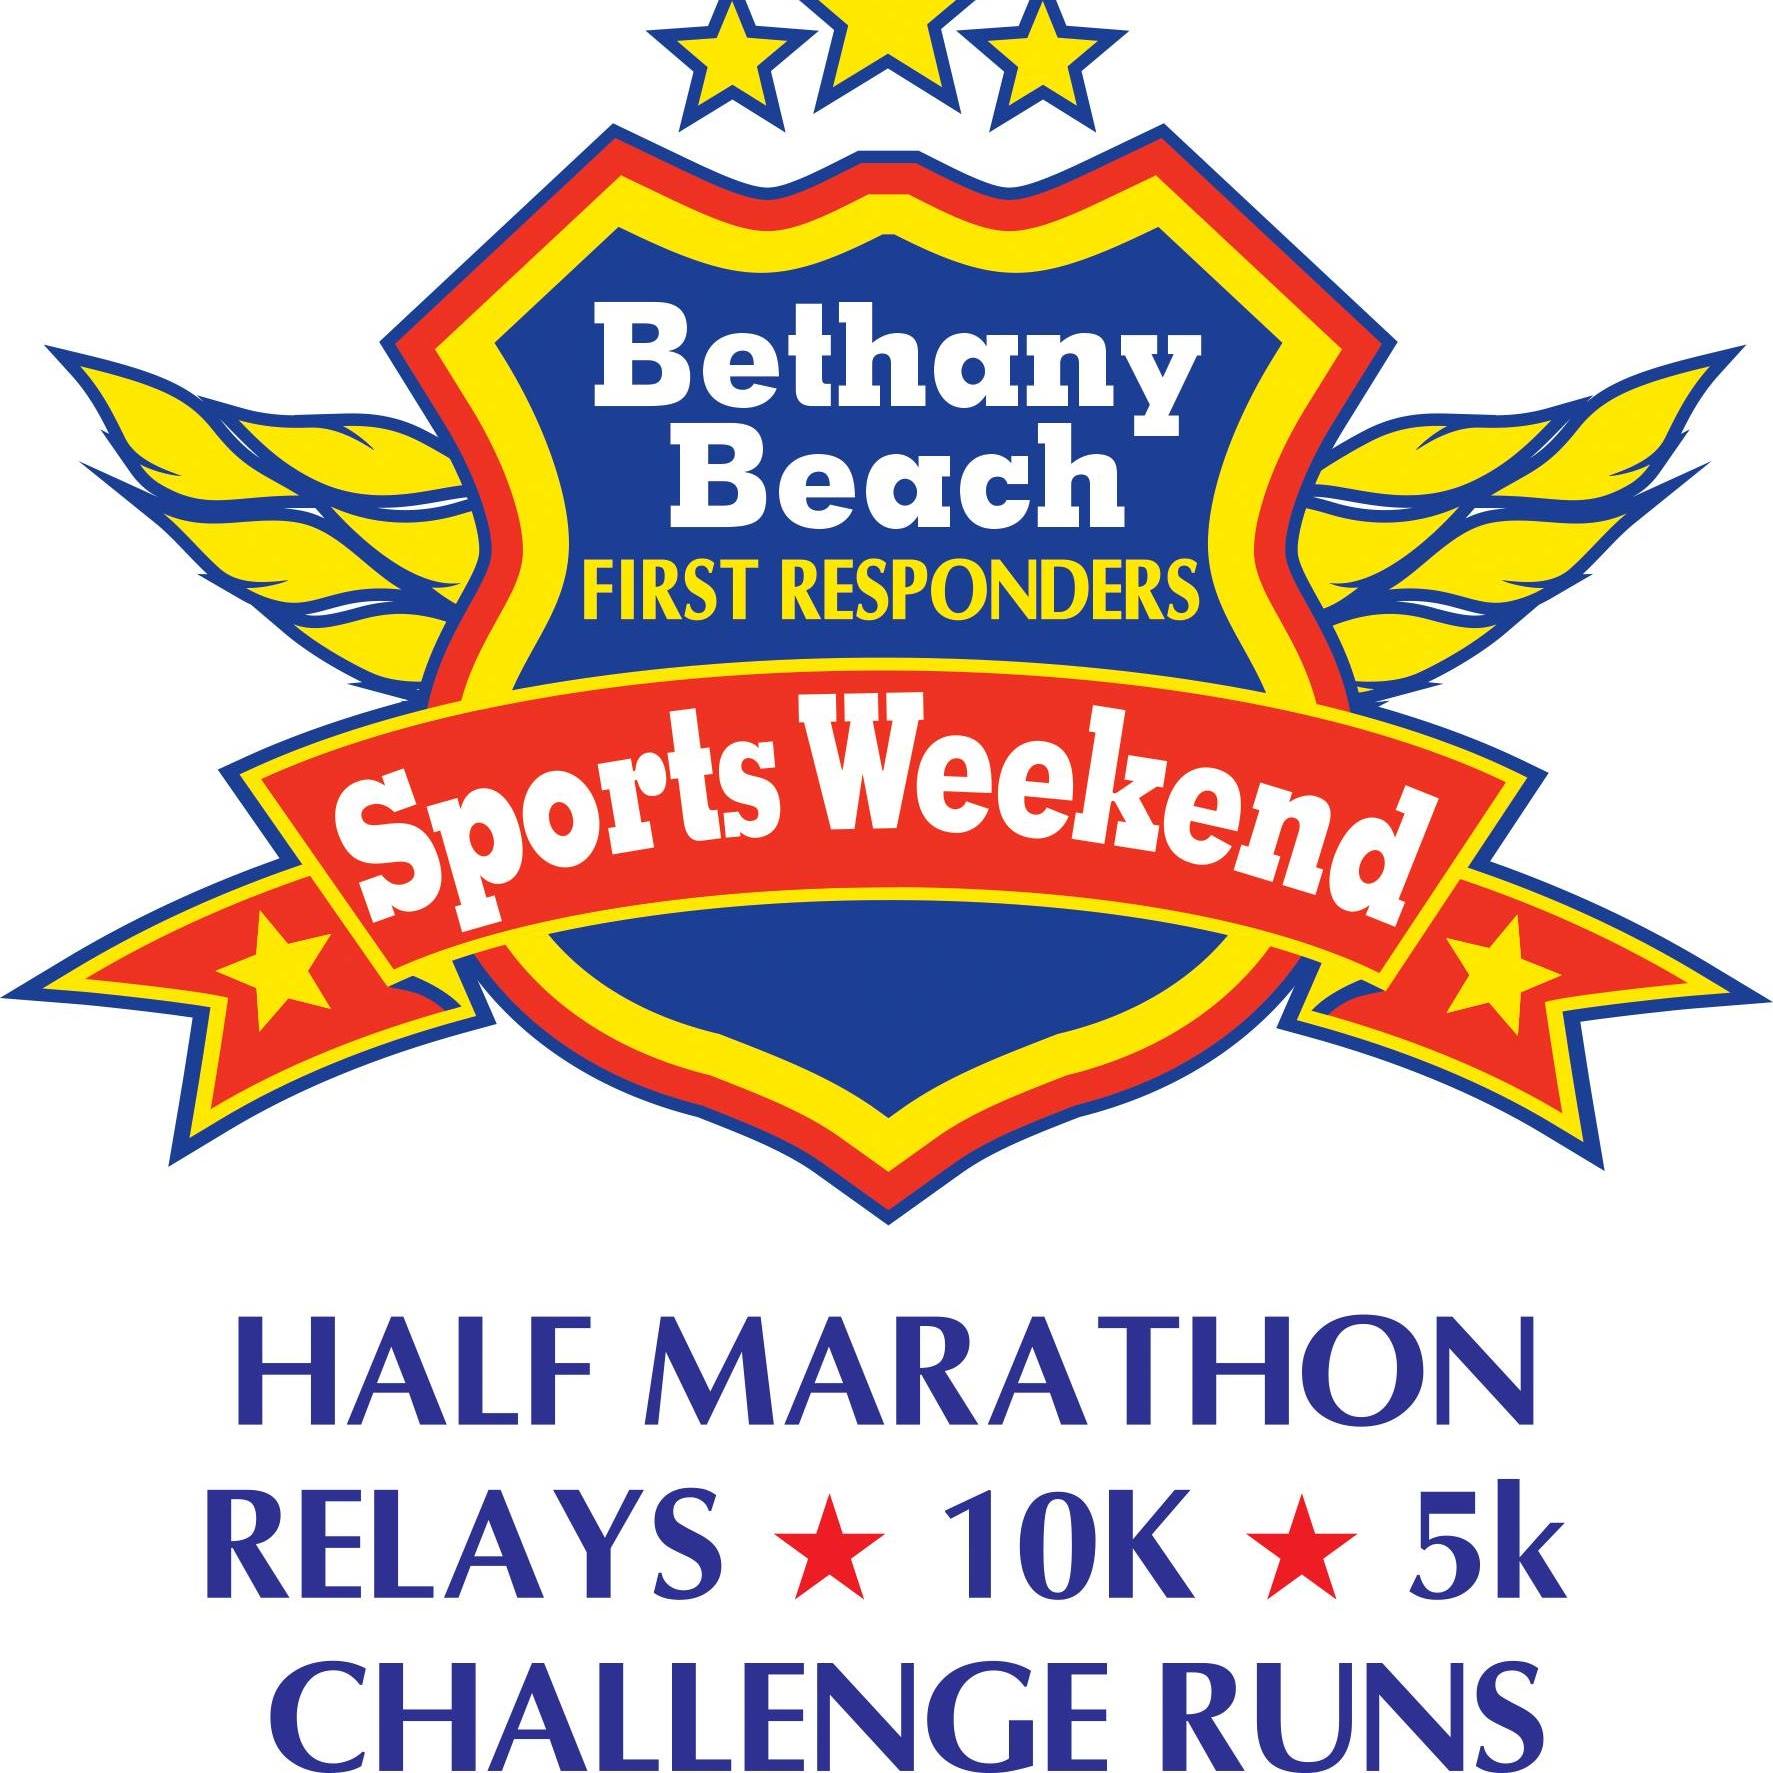 Bethany Beach First Responders Sports Weekend logo on RaceRaves